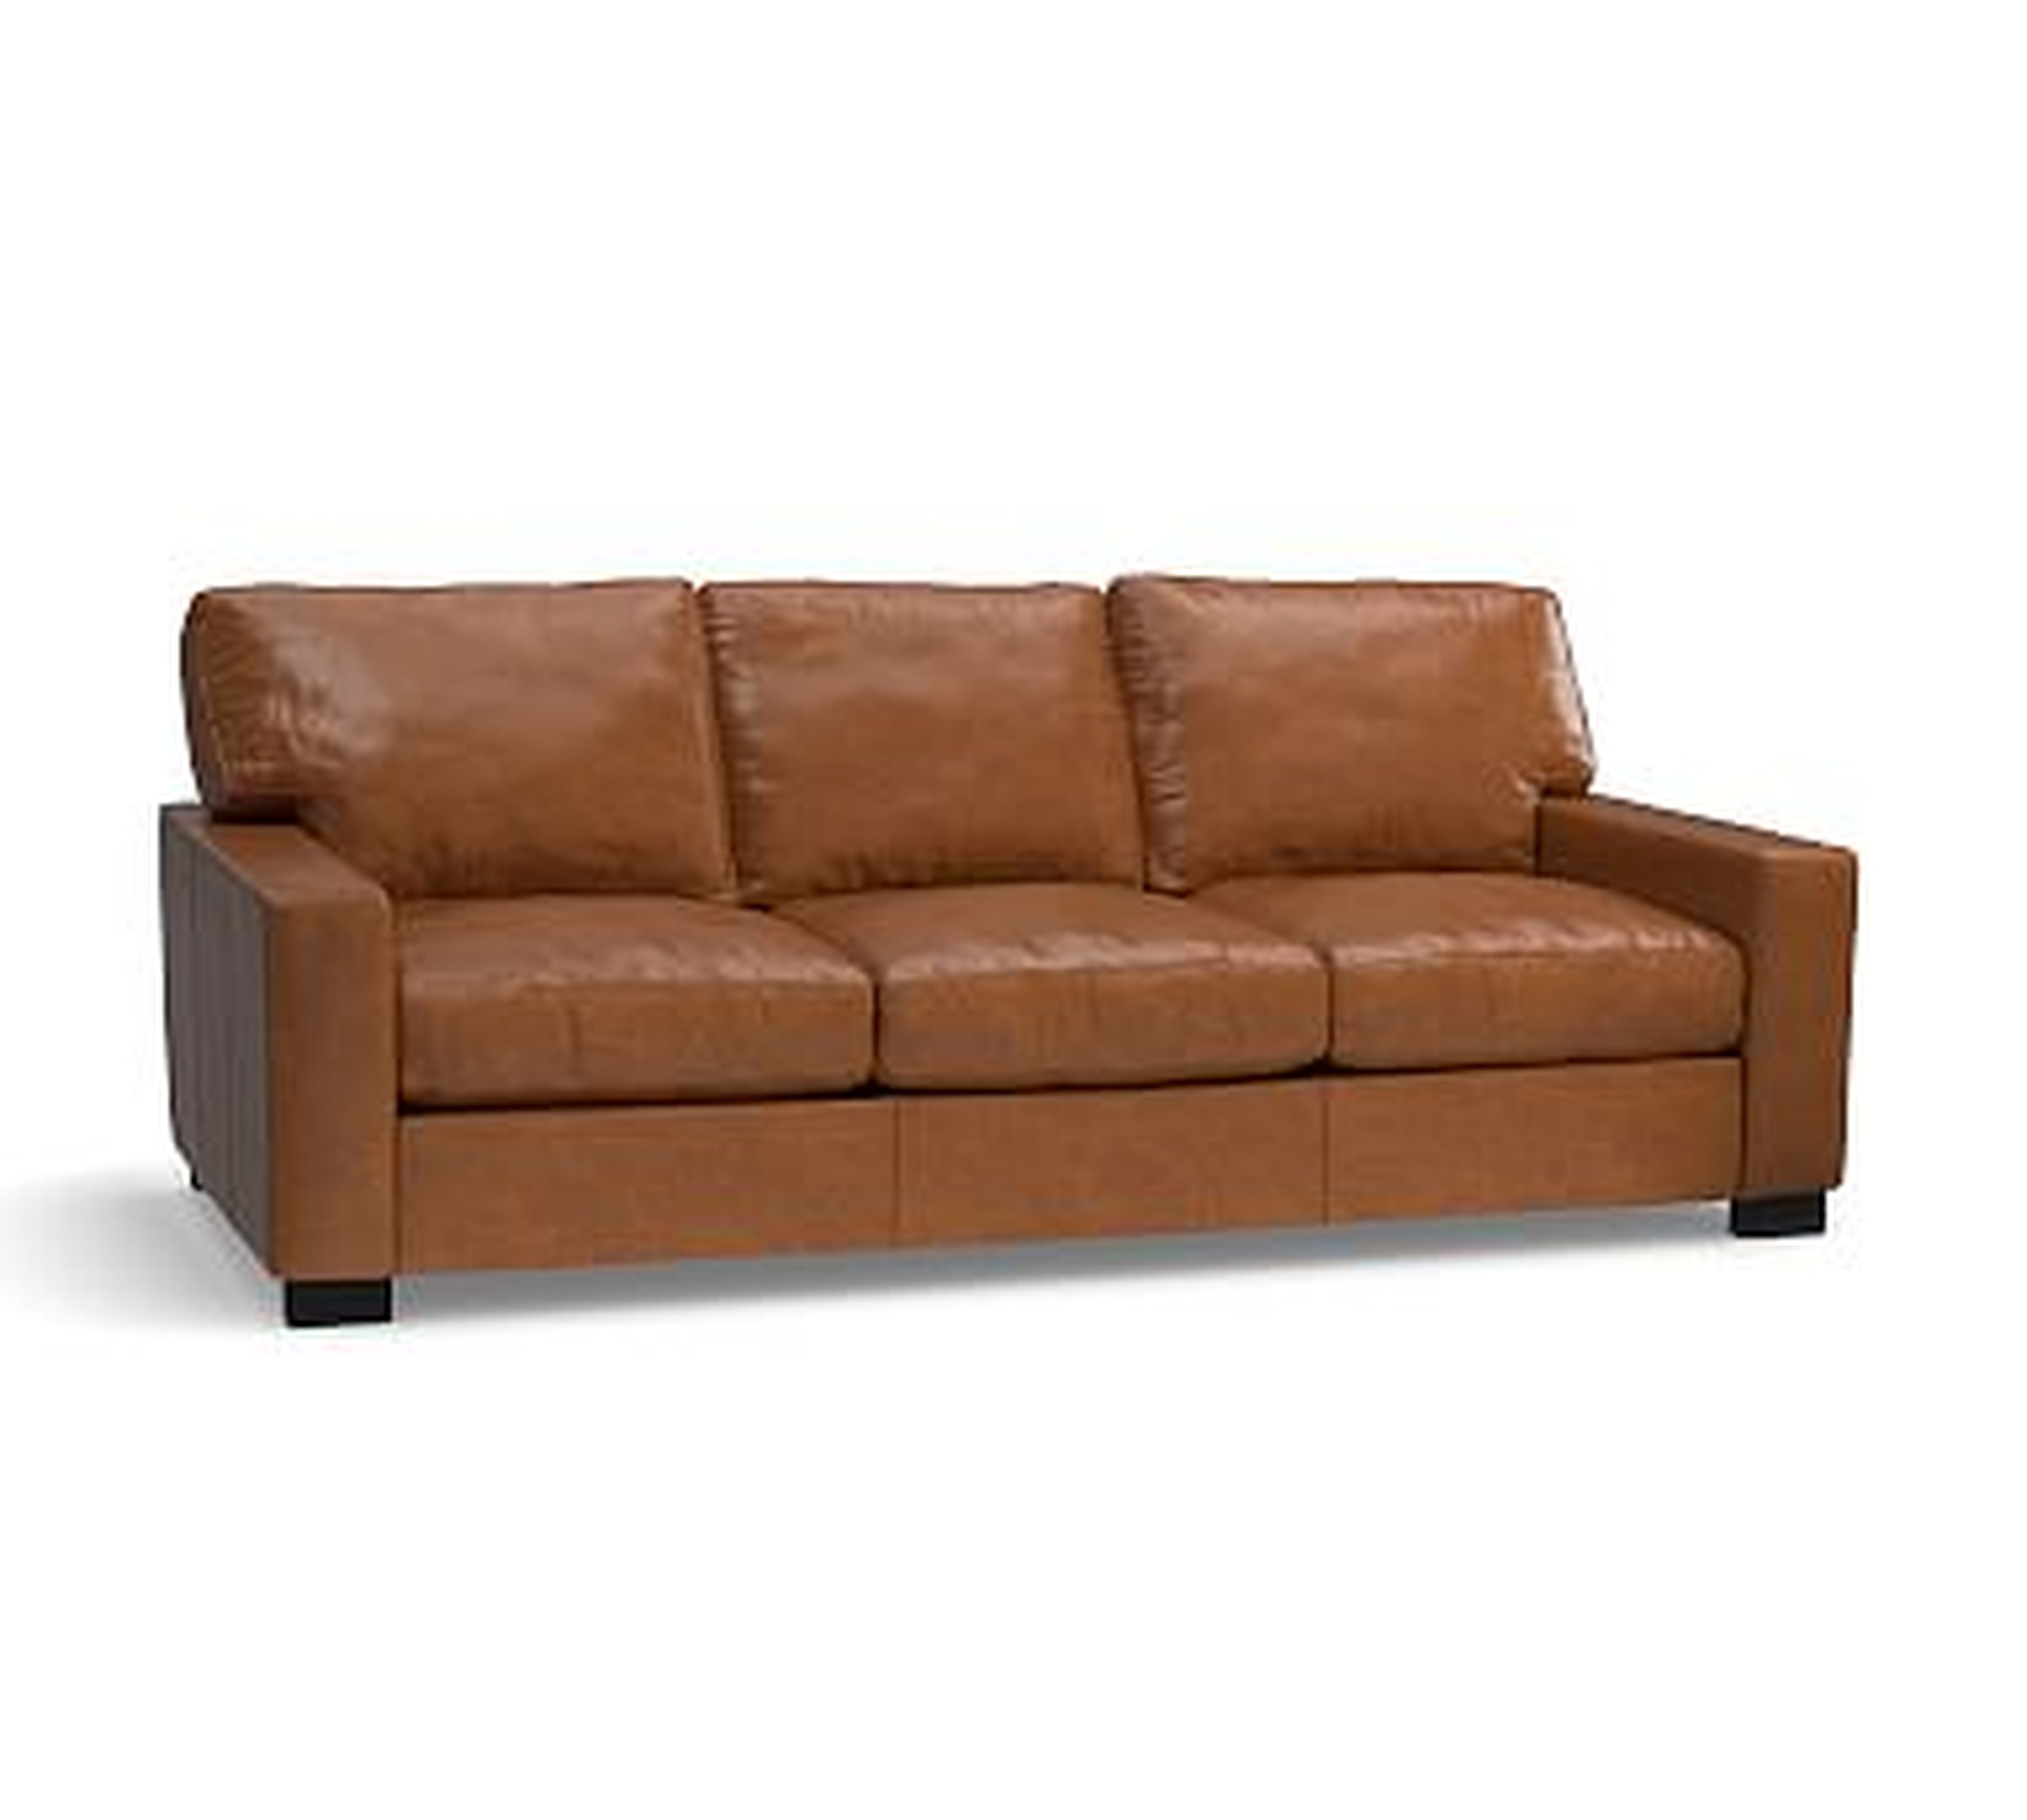 Turner Square Arm Leather Sofa 3-Seater 85.5", Down Blend Wrapped Cushions, Vintage Caramel - Pottery Barn